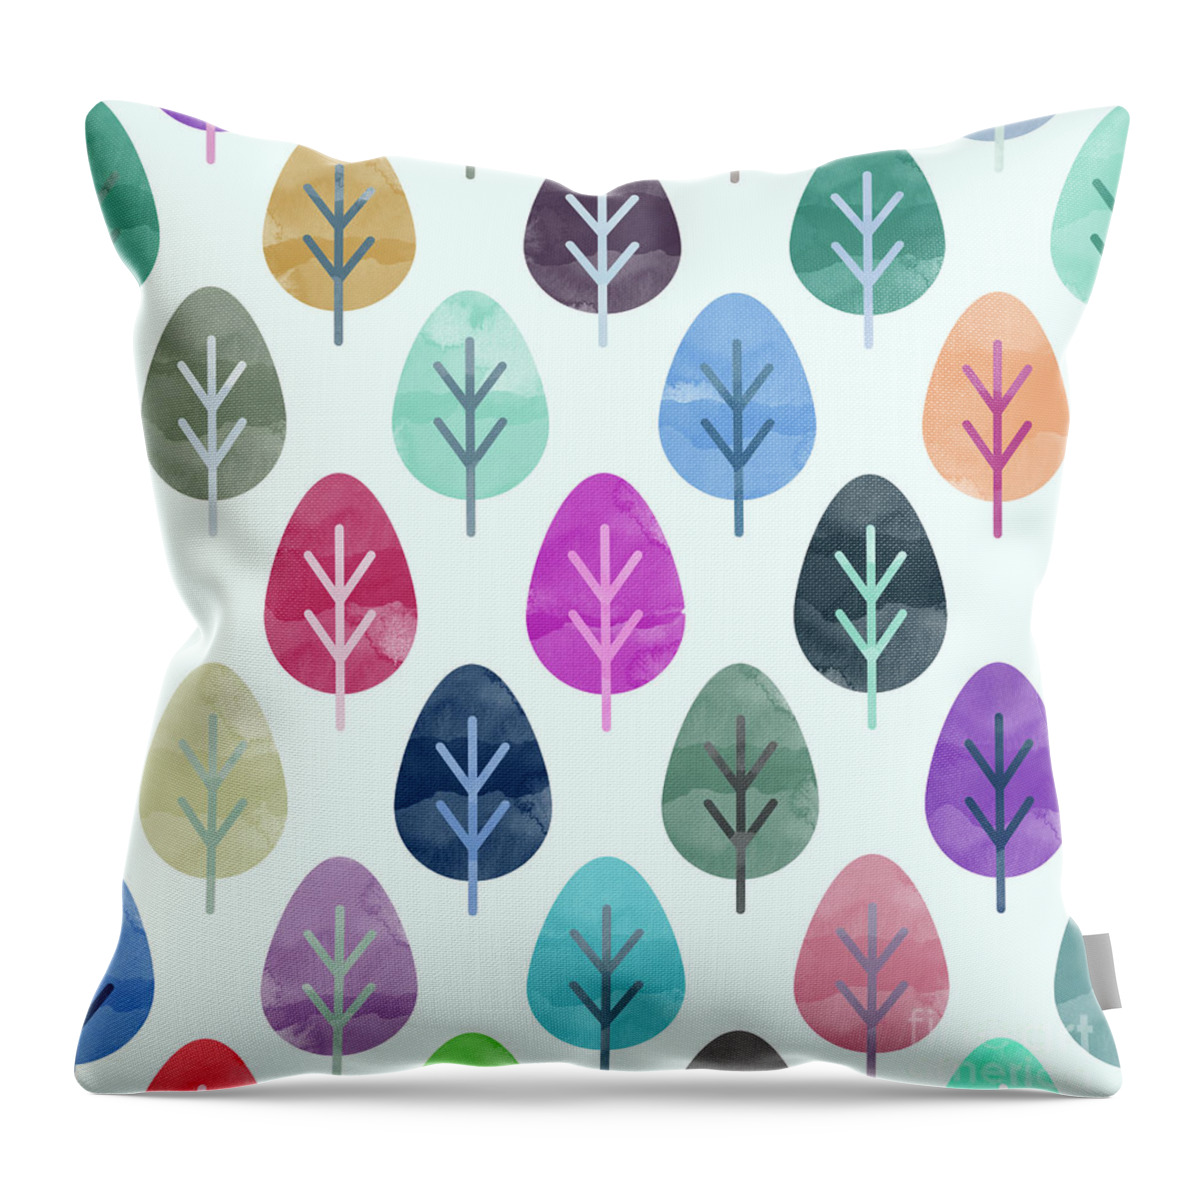 Watercolor Throw Pillow featuring the digital art Watercolor forest pattern by Amir Faysal